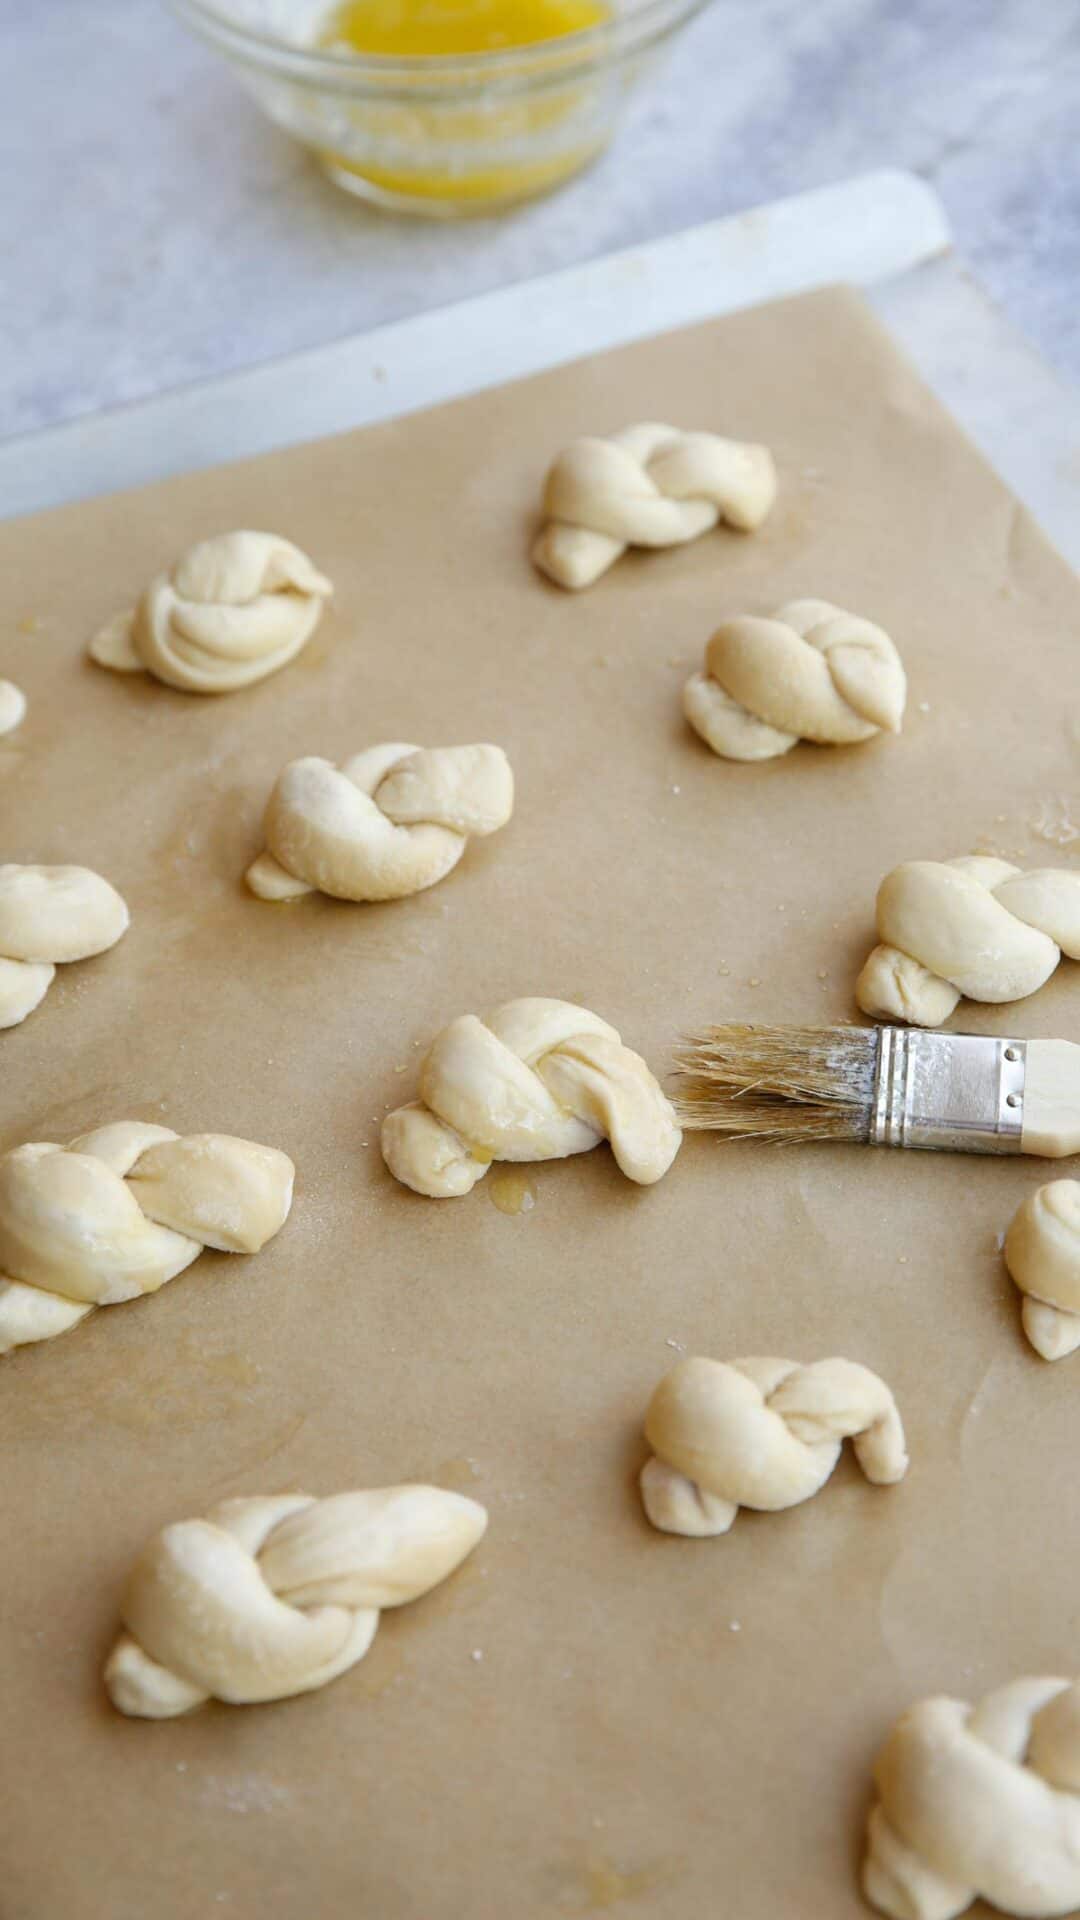 dough knots being brushed with melted butter